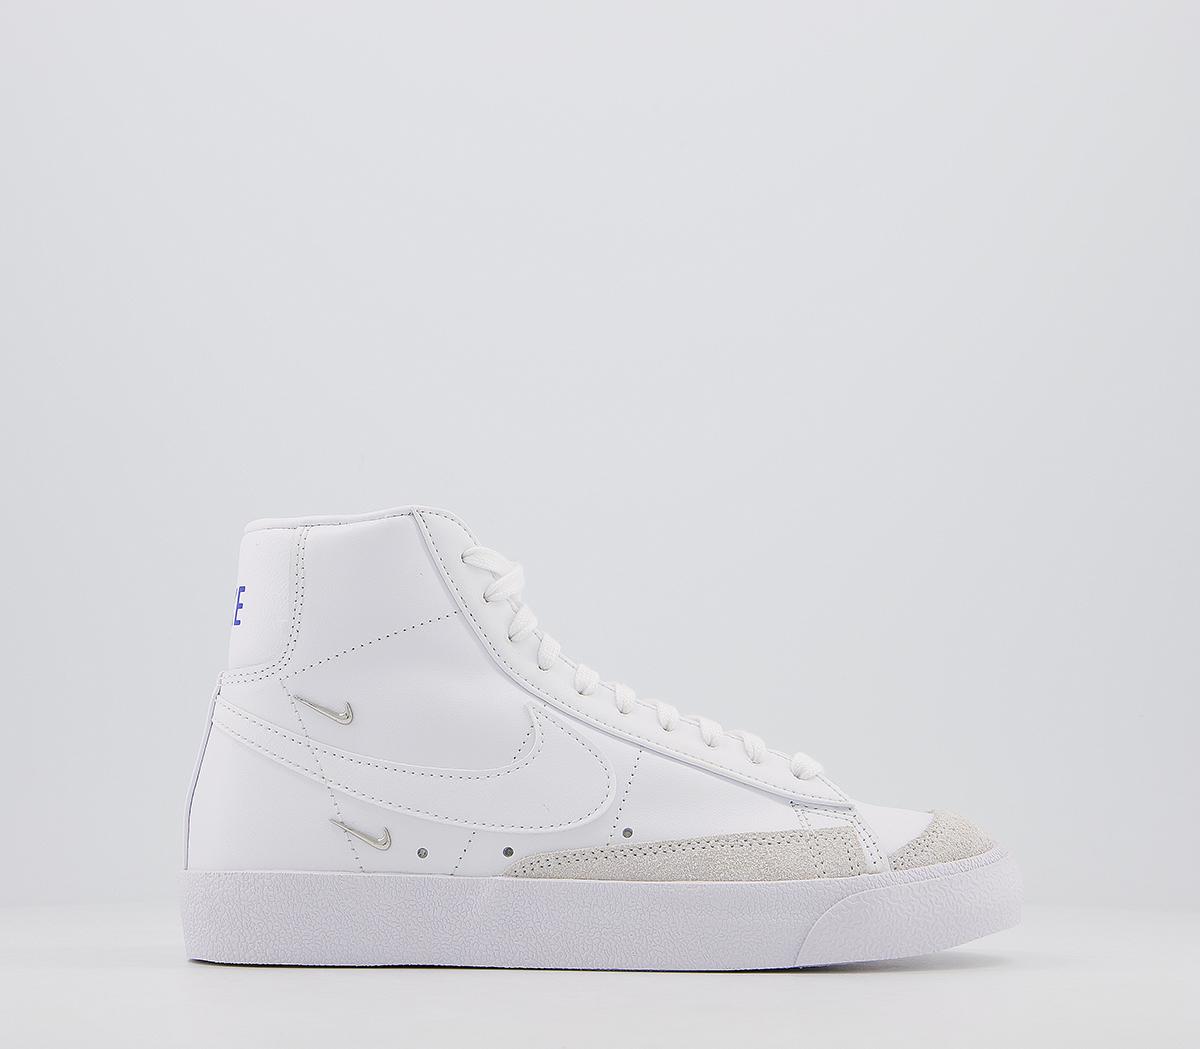 Nike Blazer Mid 77 Trainers White White Hyper Royal Se Hers Trainers